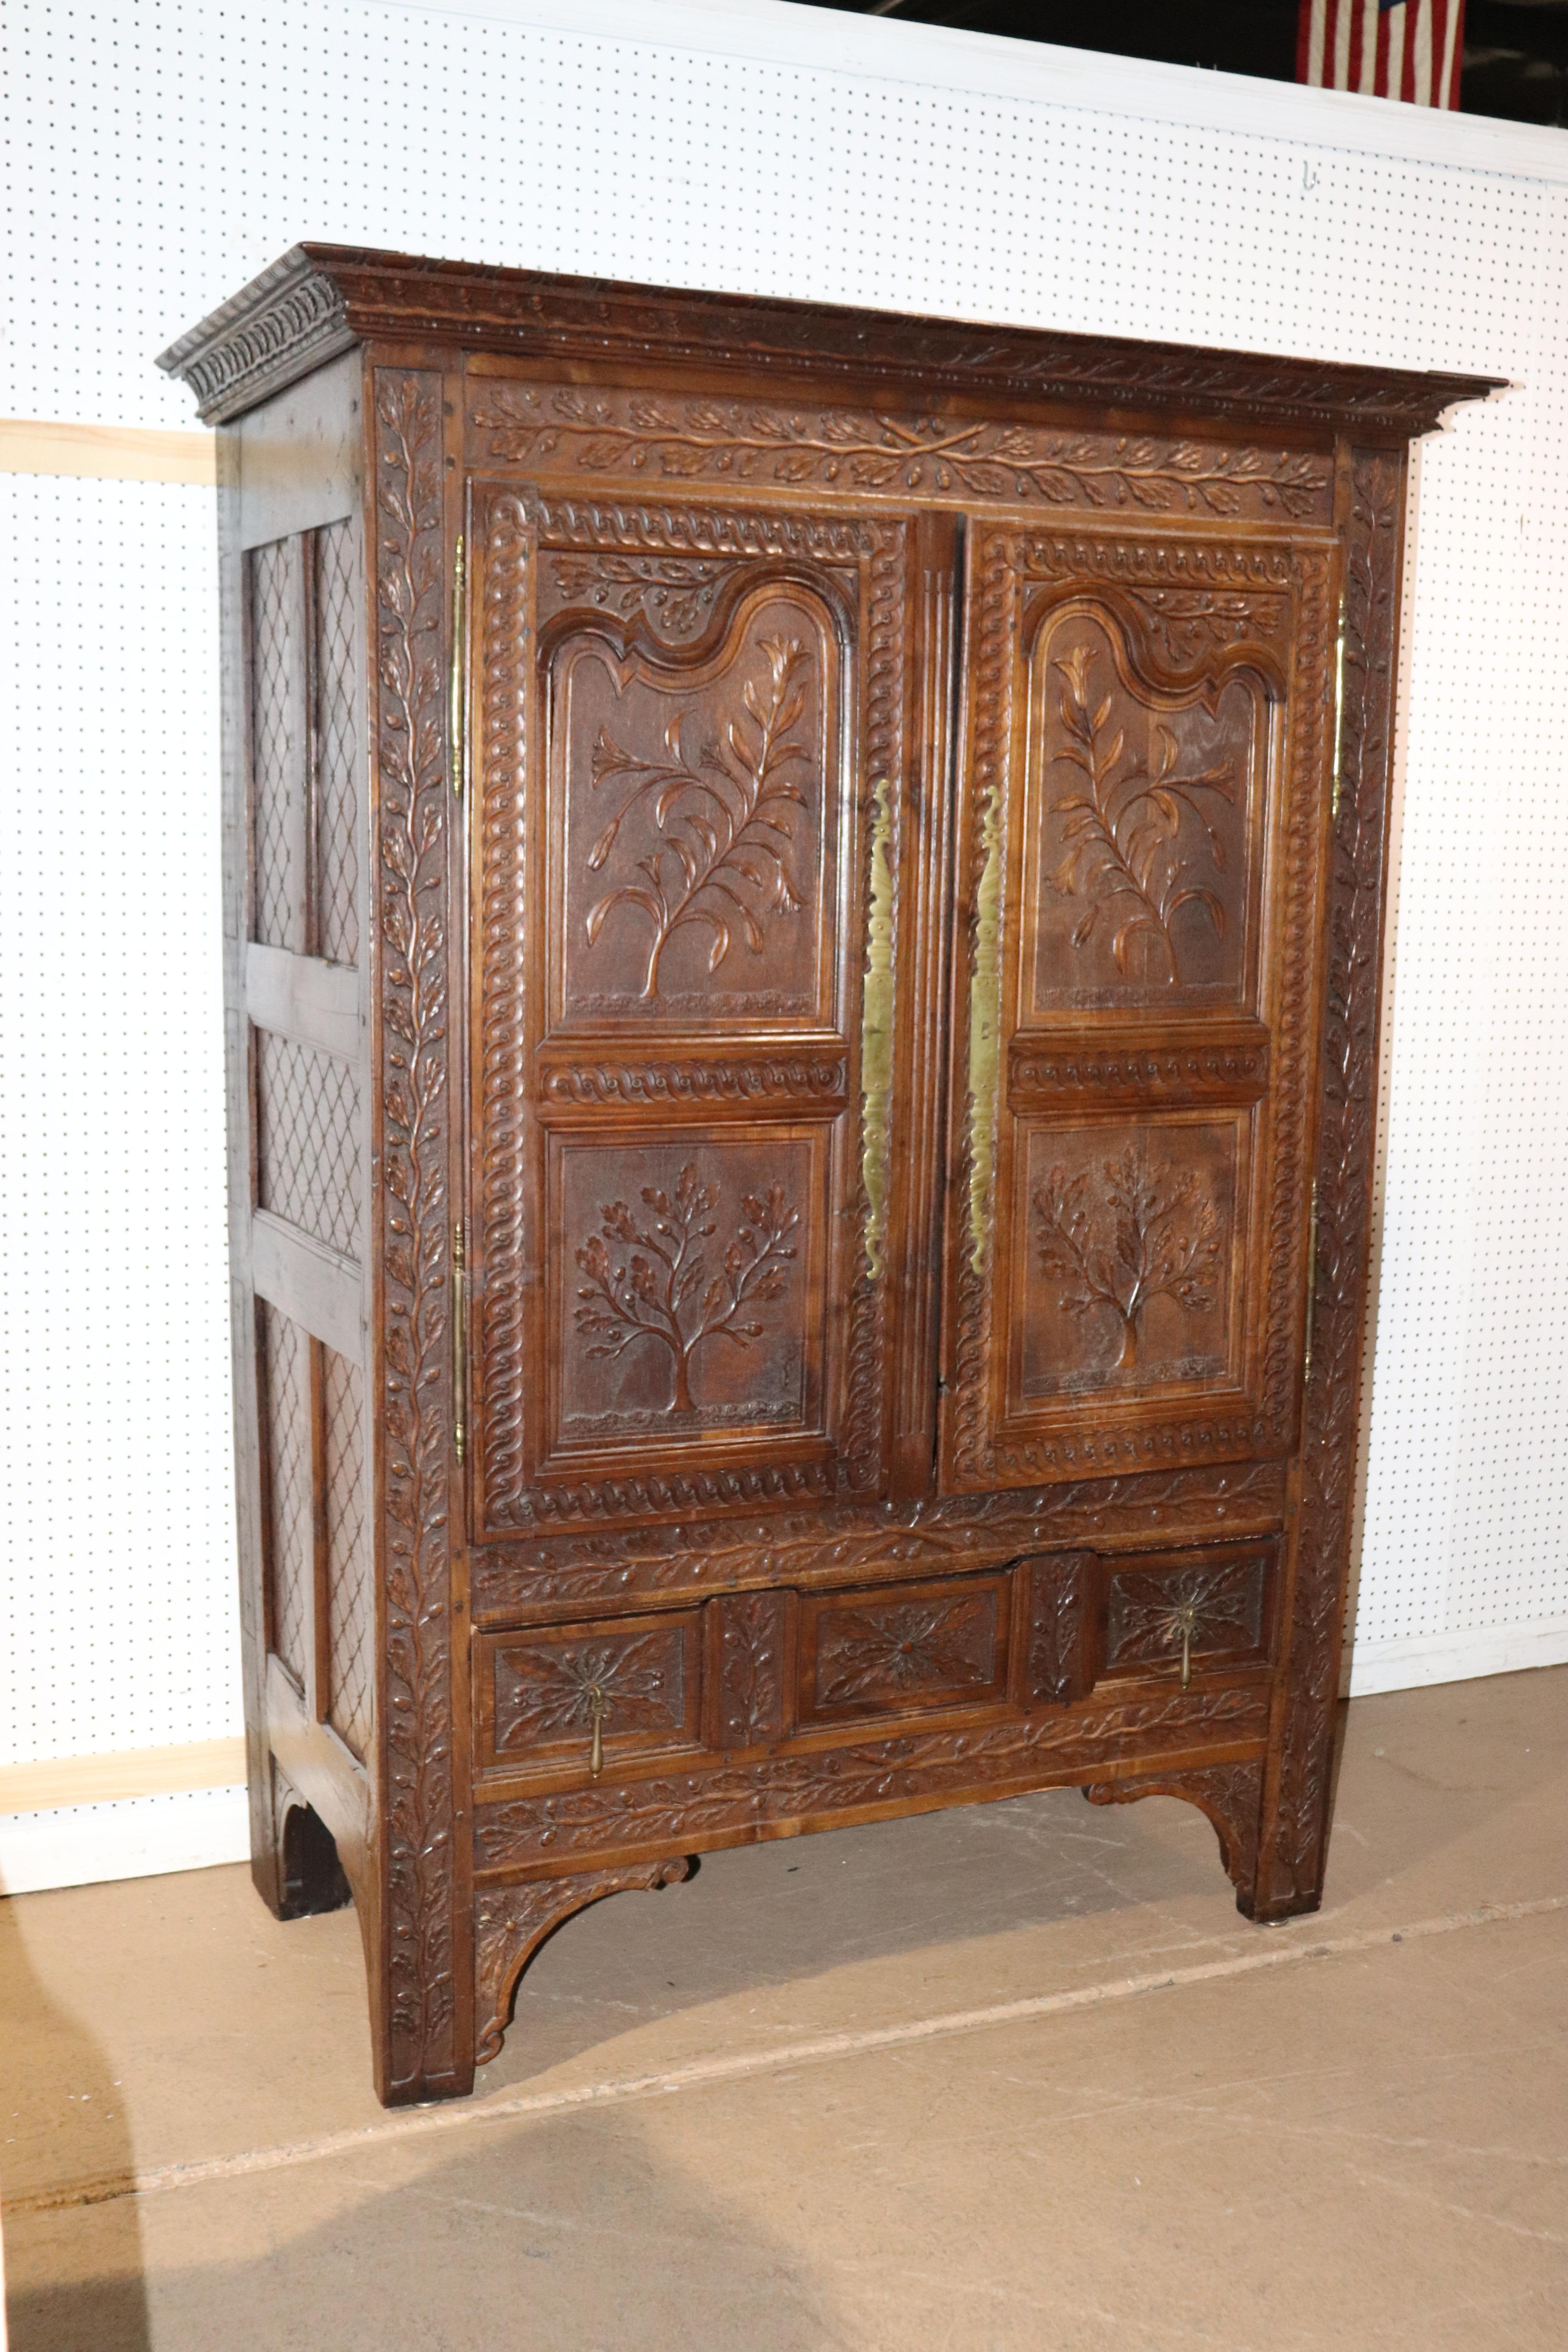 This is a superbly carved French armoire from the 1780s that's been beautifully converted into a TV cabinet. The interior has a hold drilled into it for wiring and is lined in a beautiful paper. The cabinet has a single drawer and the bottom and